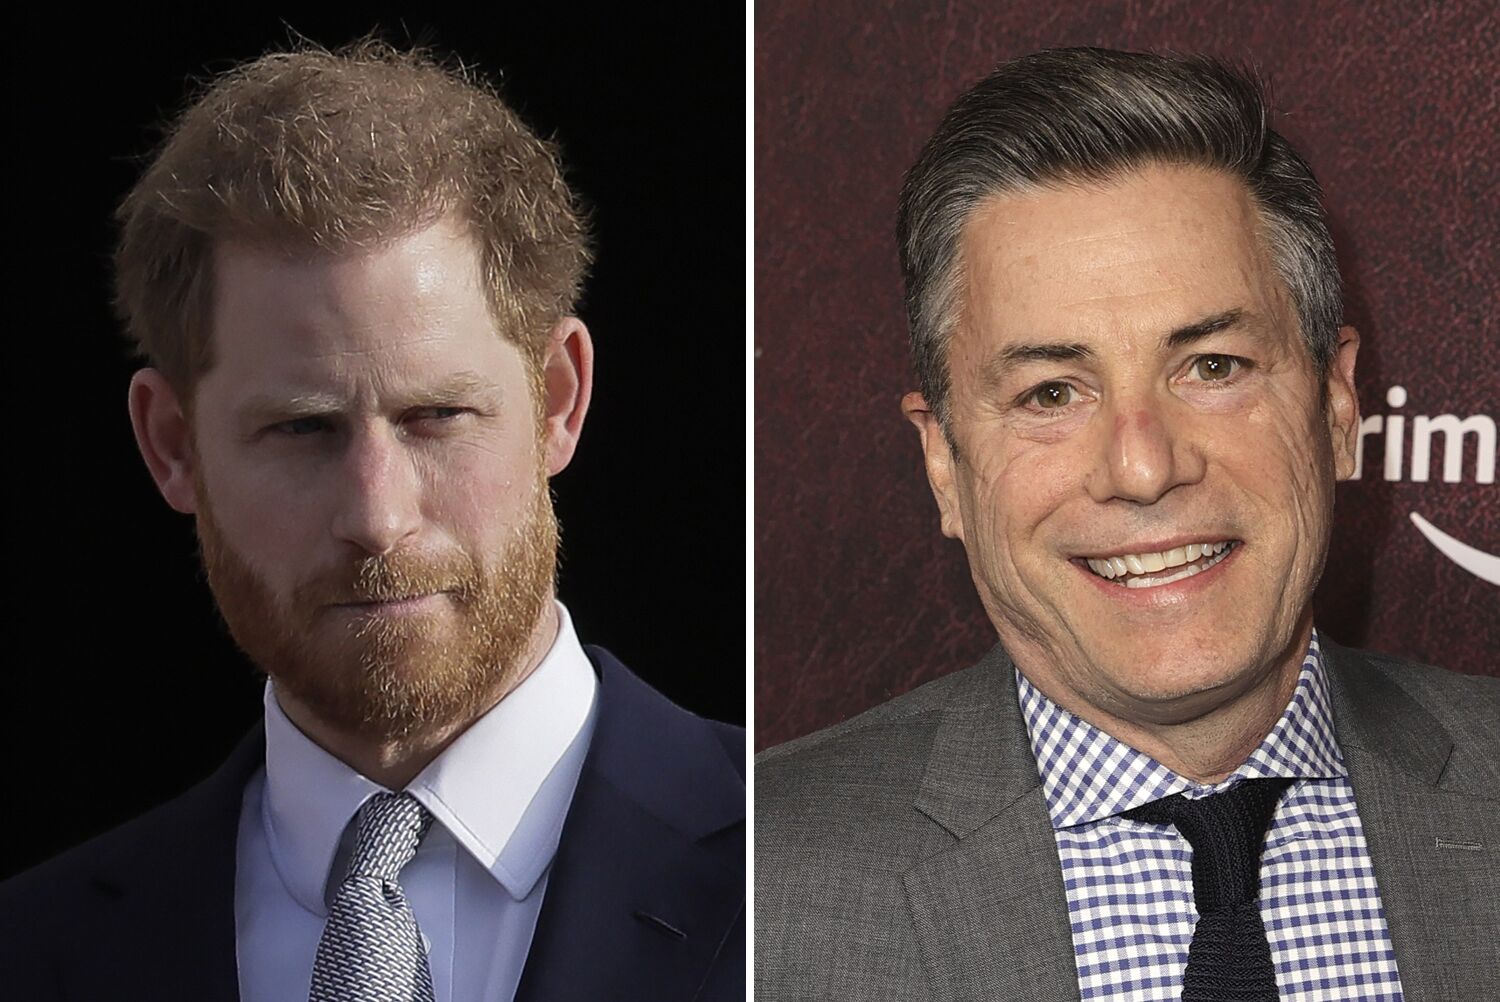 Prince Harry's 'Spare' ghostwriter defends book's mistakes as it breaks sales records